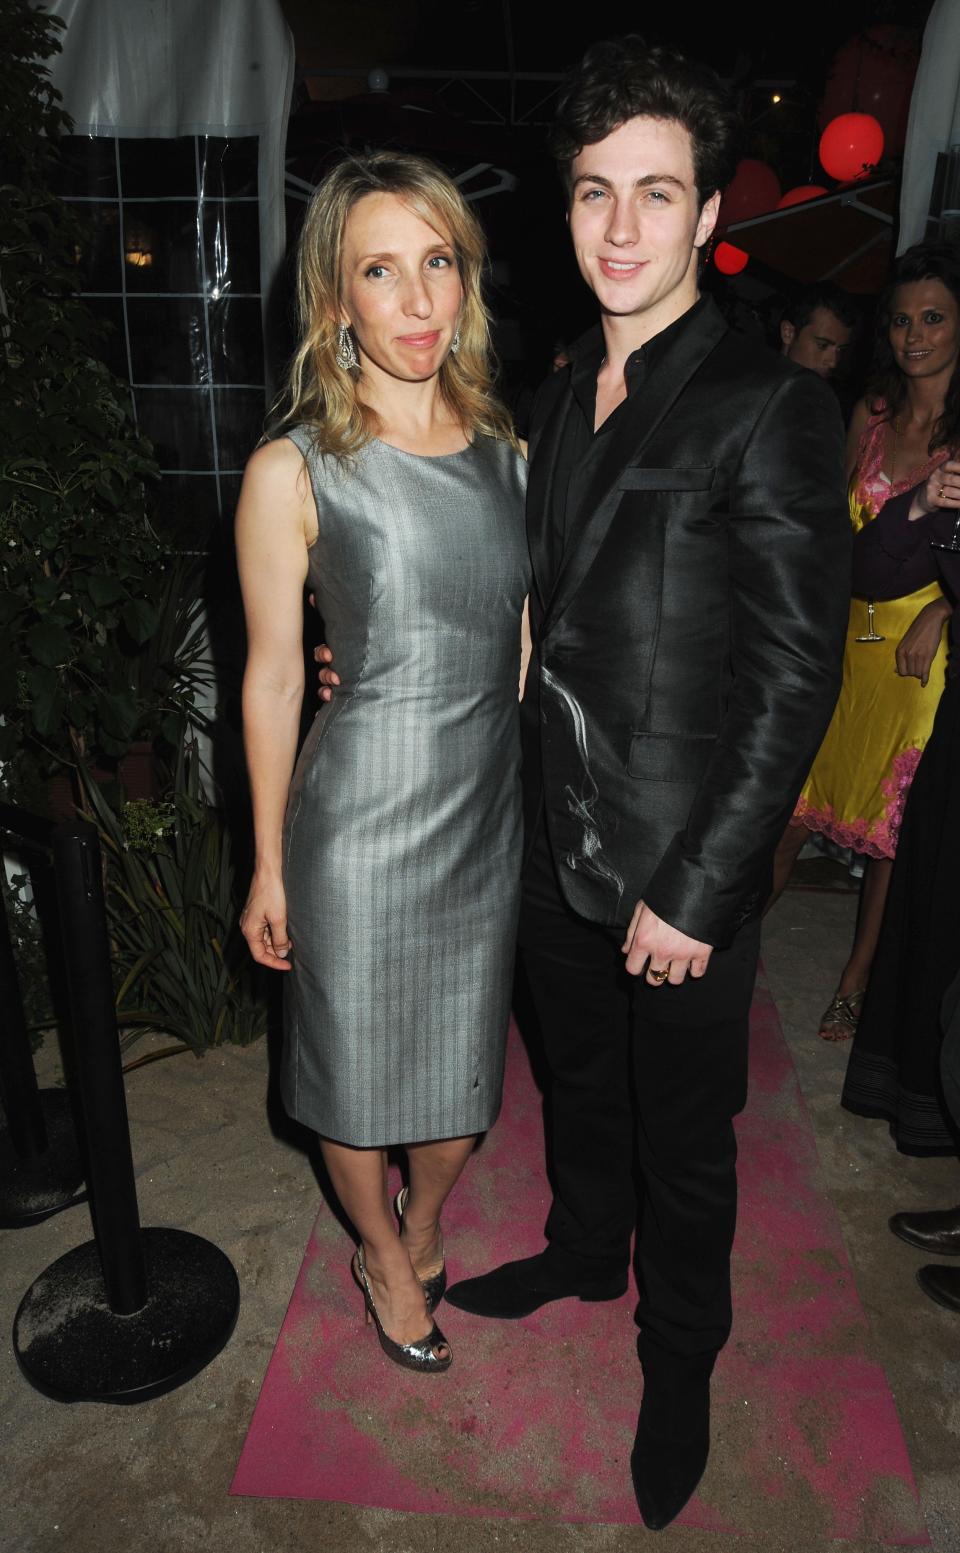 Sam Taylor-Wood and Aaron Johnson at the 62nd International Cannes Film Festival on May 17, 2009.